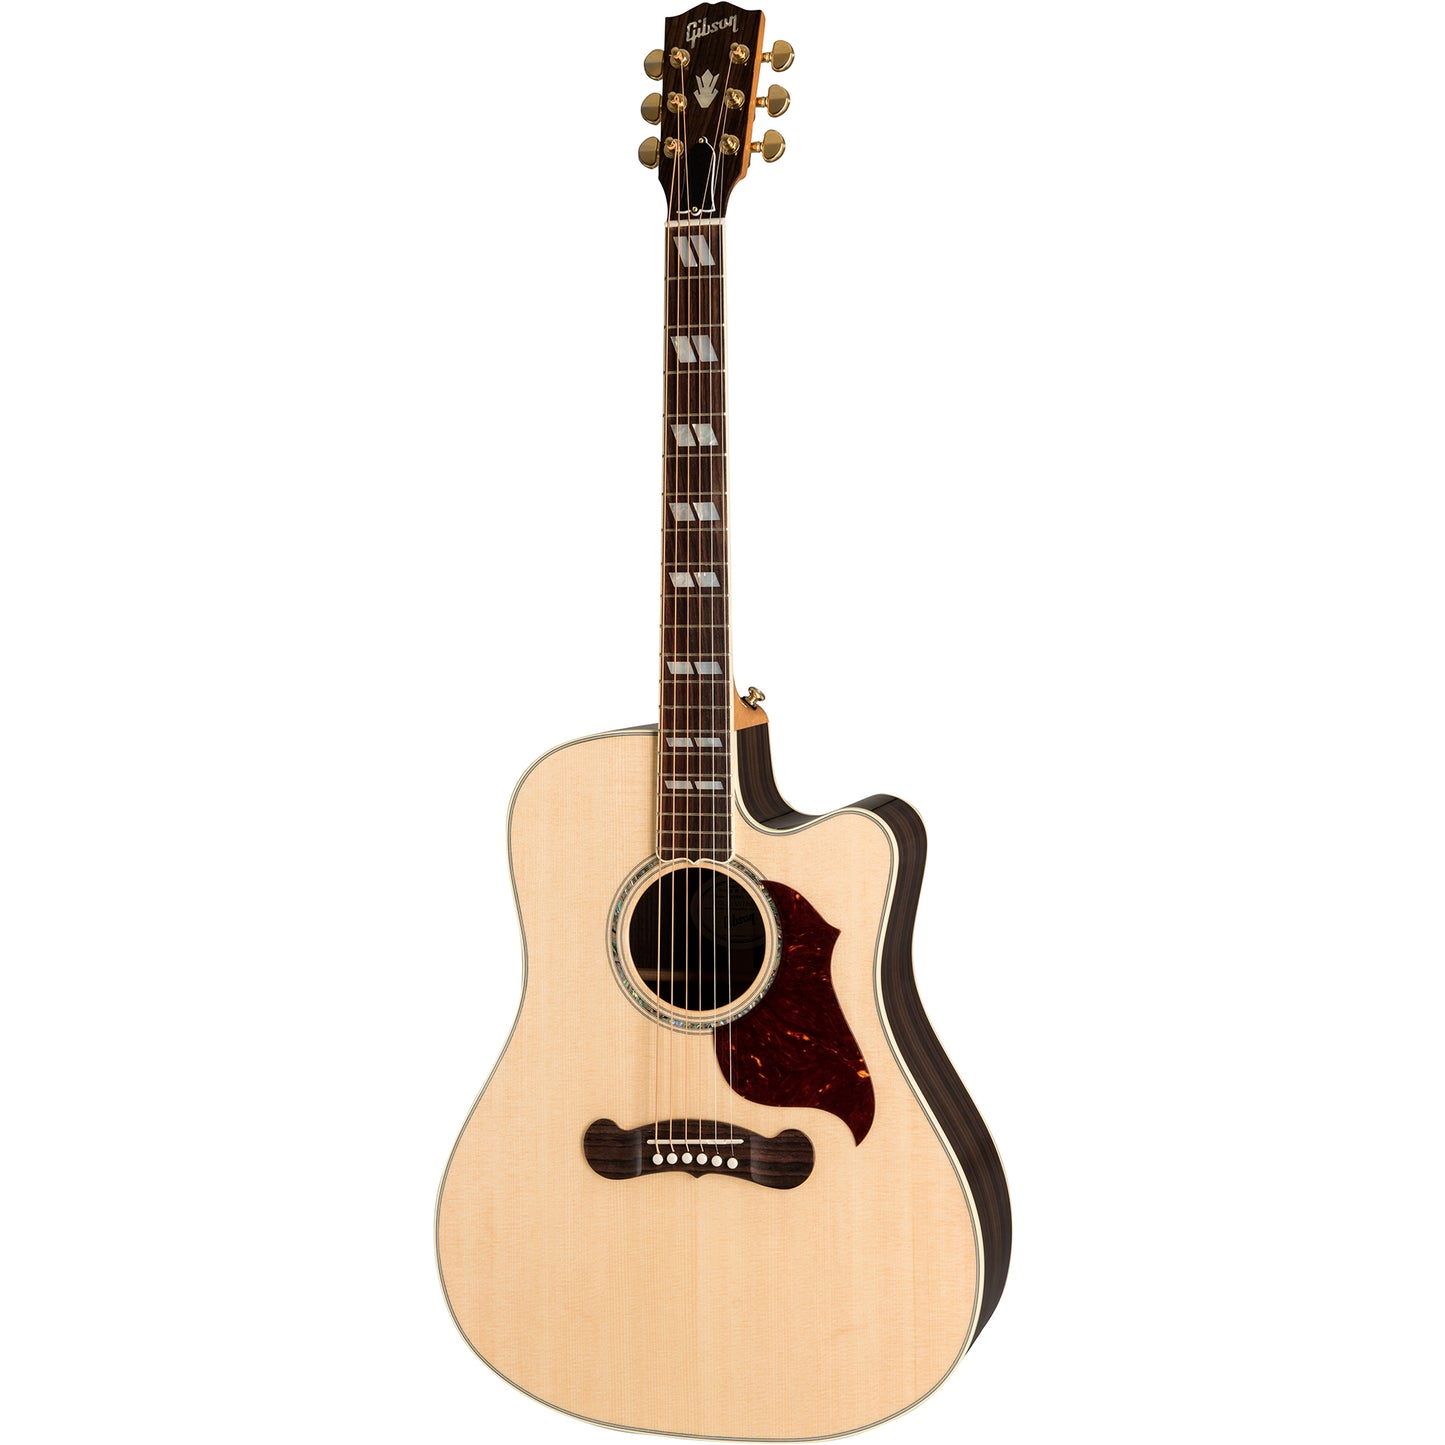 Gibson Songwriter Standard EC Rosewood Acoustic Guitar - Antique Natural